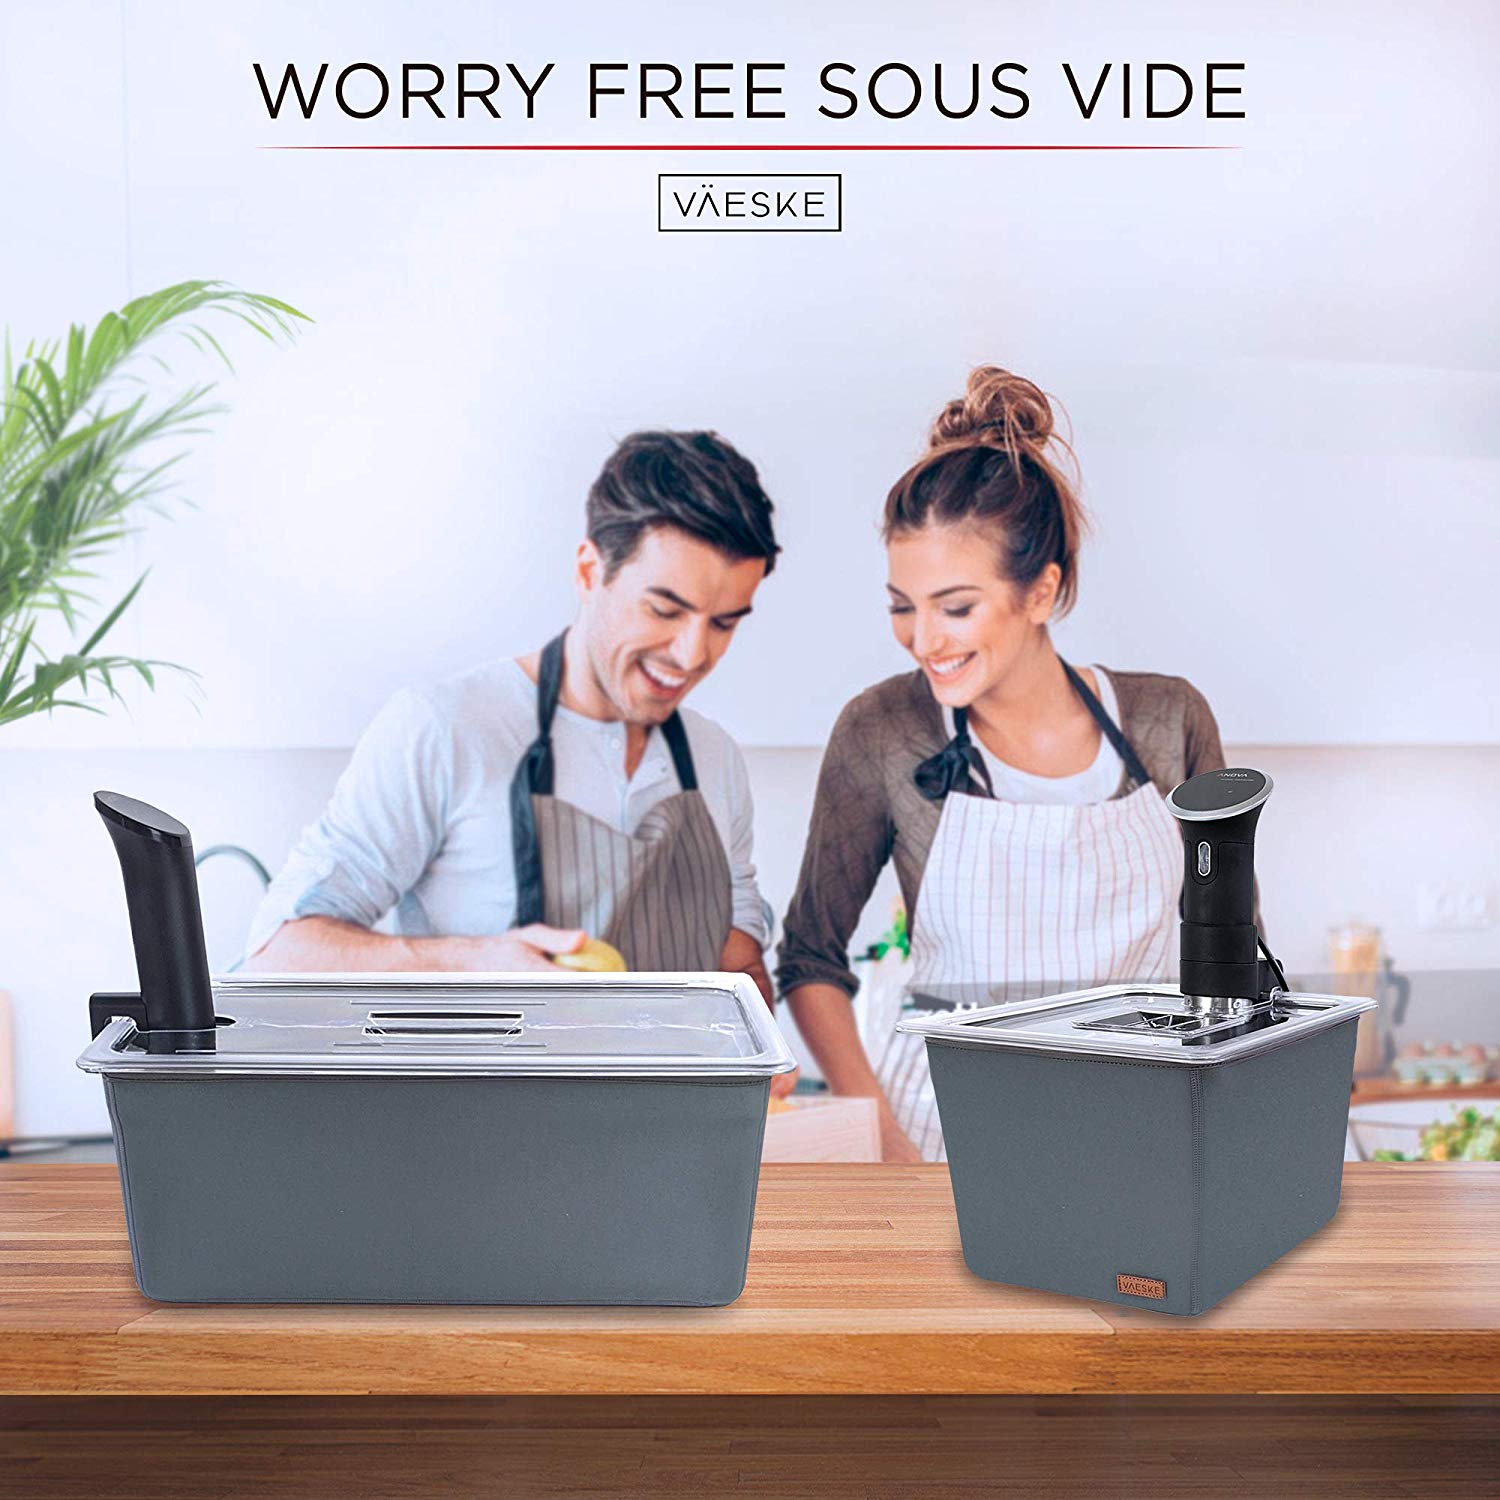 VÄESKE Large Sous Vide Container with Lid, Racks & Insulating Sleeve | 26 Quart Size | Retains Heat & Protects Countertops | Durable Polycarbonate Stainless Steel and Neoprene Sous Vide Accessories | Works with Most Sous Vide Cookers